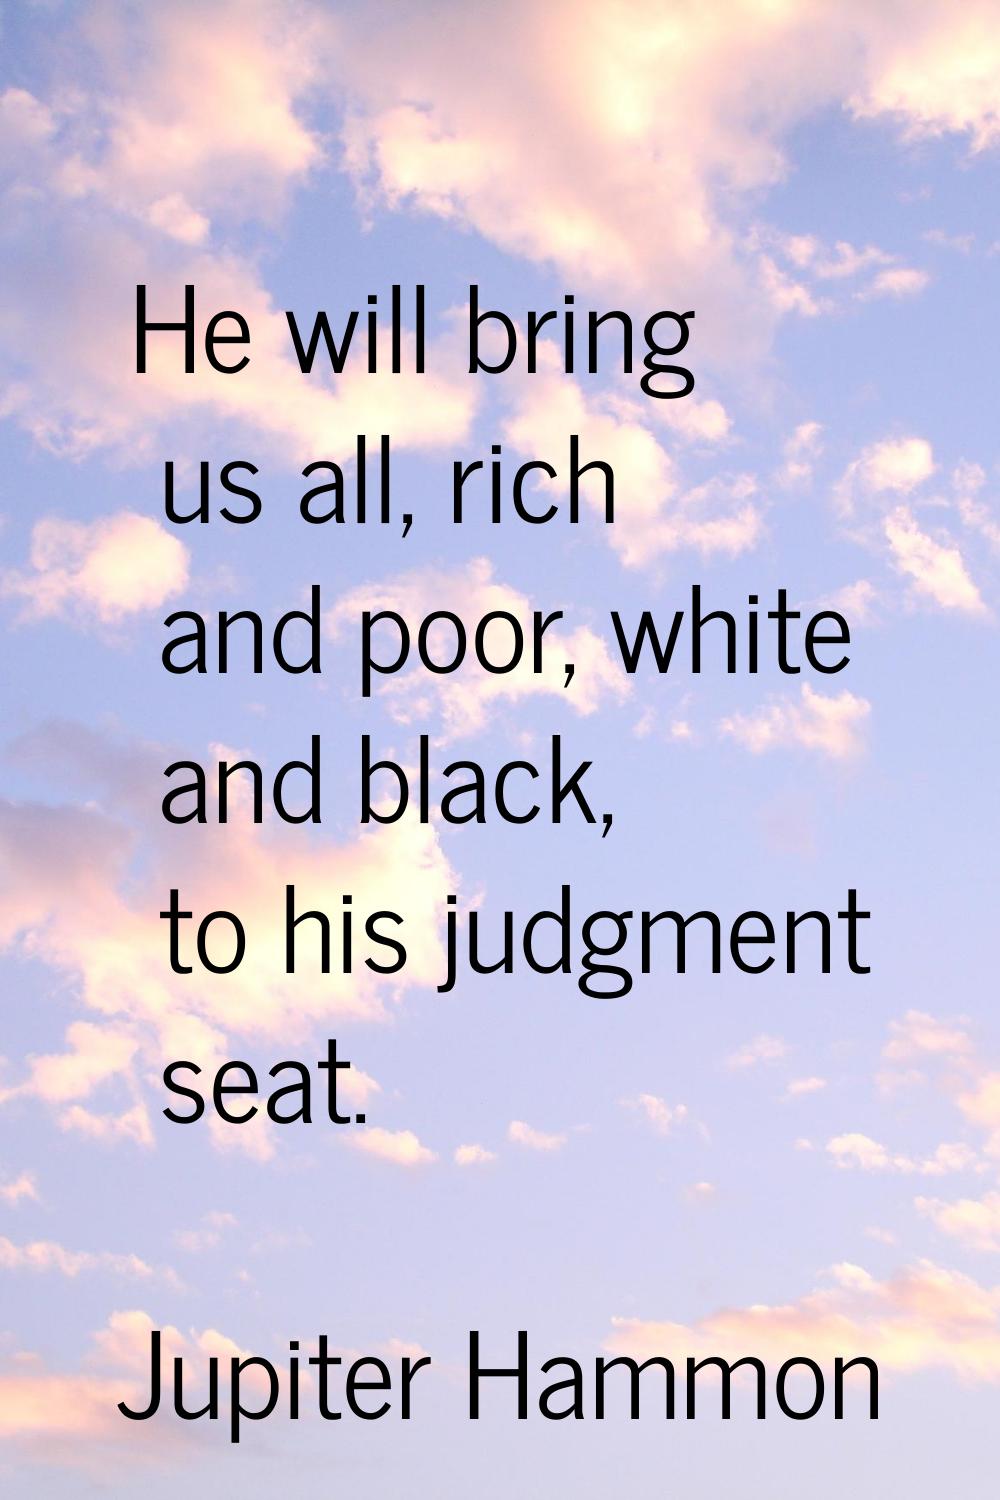 He will bring us all, rich and poor, white and black, to his judgment seat.